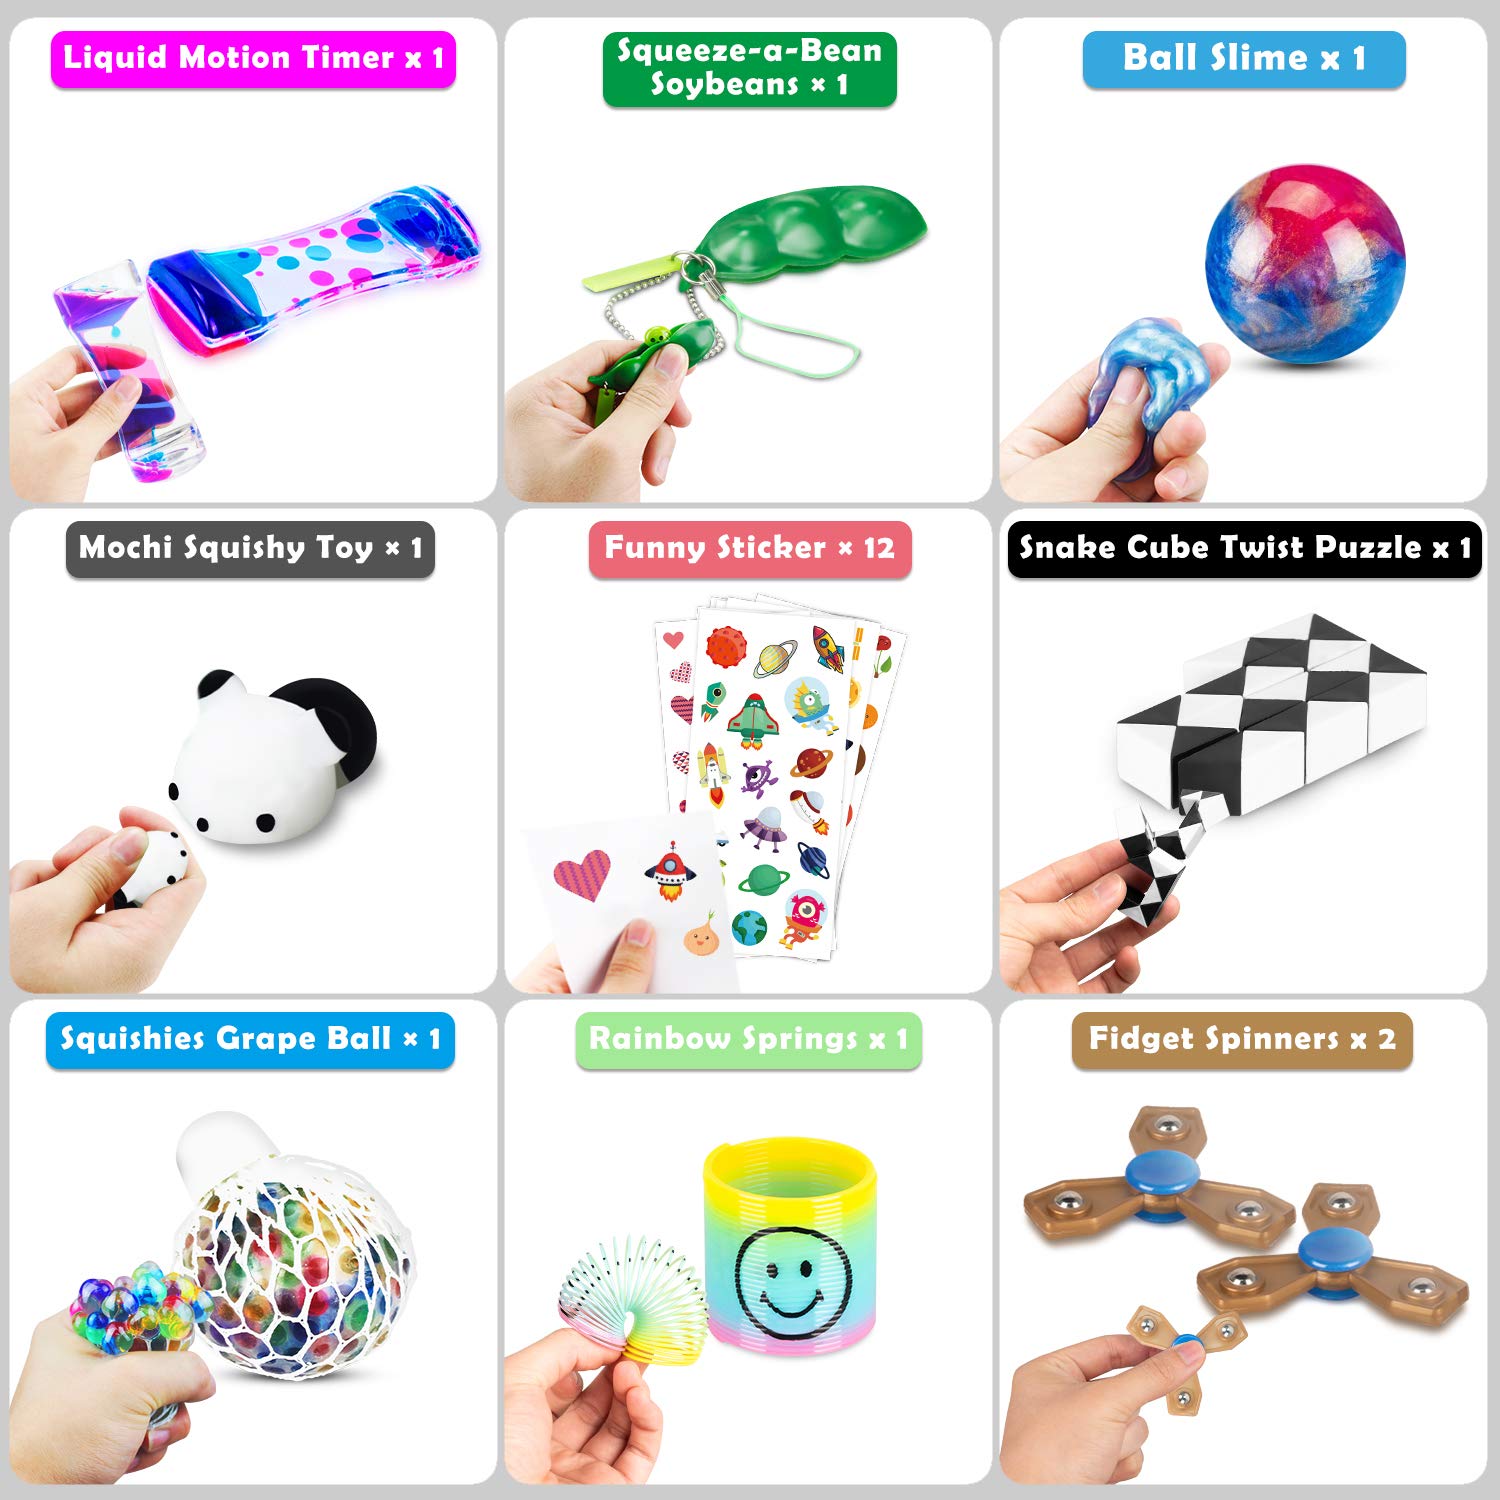 61 Pcs Sensory Fidget Toys Pack,Stress & Anxiety Relief Tools Bundle Figetget Toys Set for Kids Adults,Autistic ADHD Toys,Stress Balls Fidget Spinner Marble Mesh Puzzle Ball Pop Tube Fidget Box